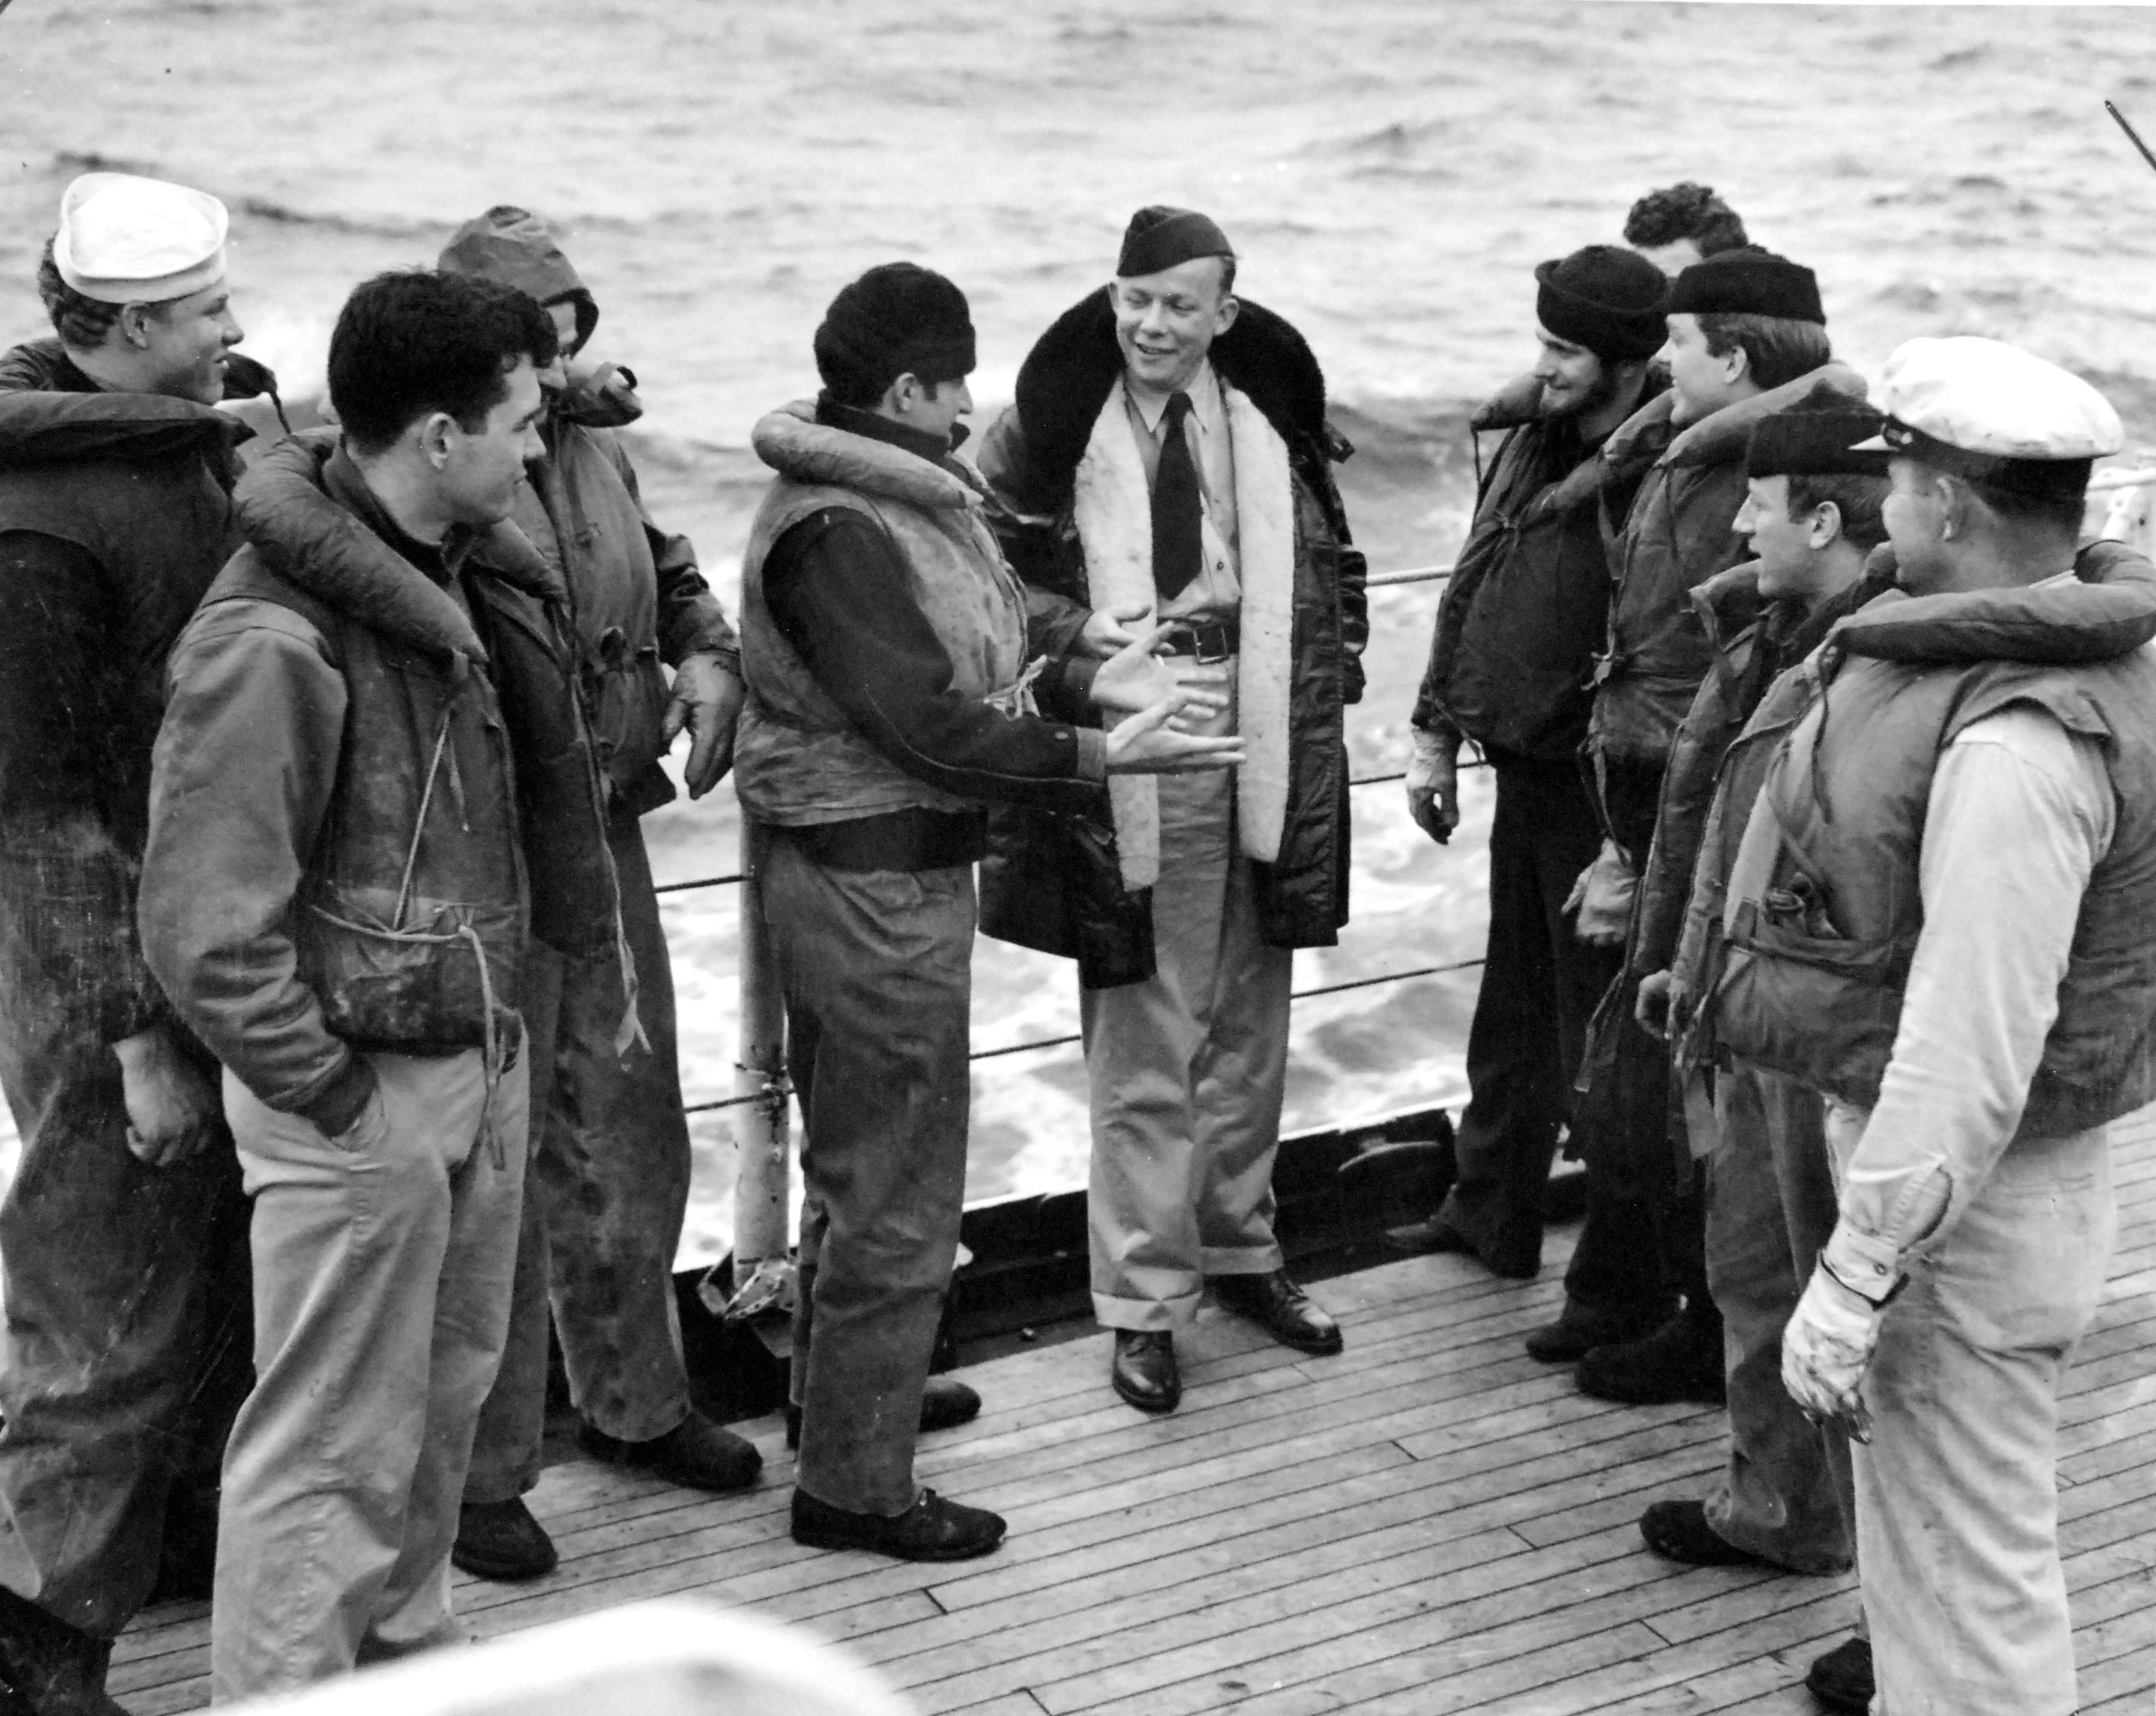 Time Magazine war correspondent William Walton, in the expensive coat, speaking with crewmen aboard the Coast Guard cutter Spencer, early 1943 in the Atlantic.